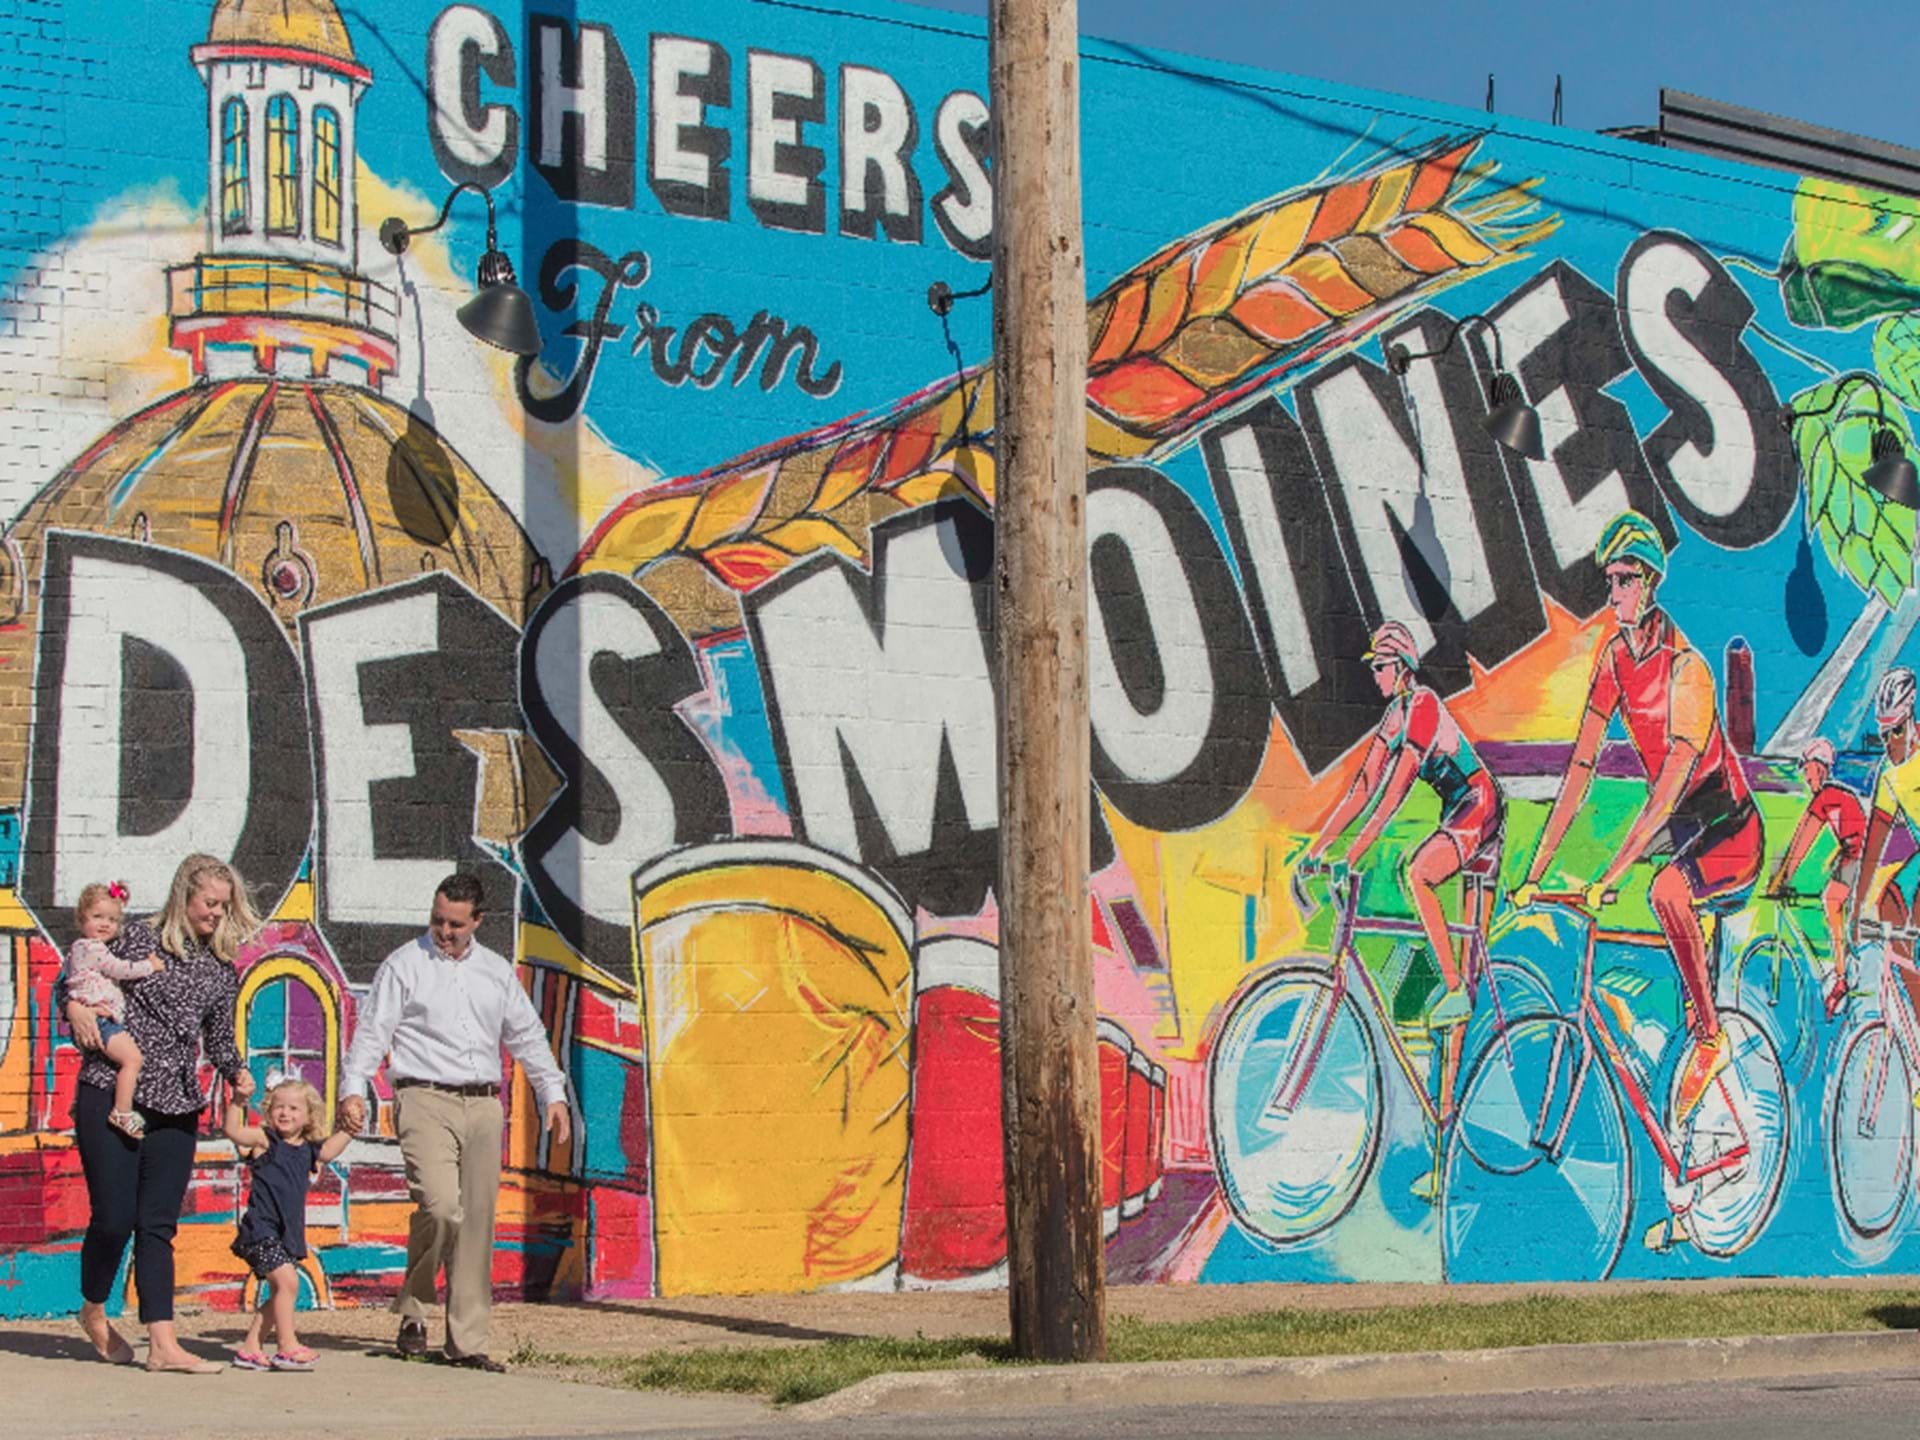 Cheers from Des Moines mural